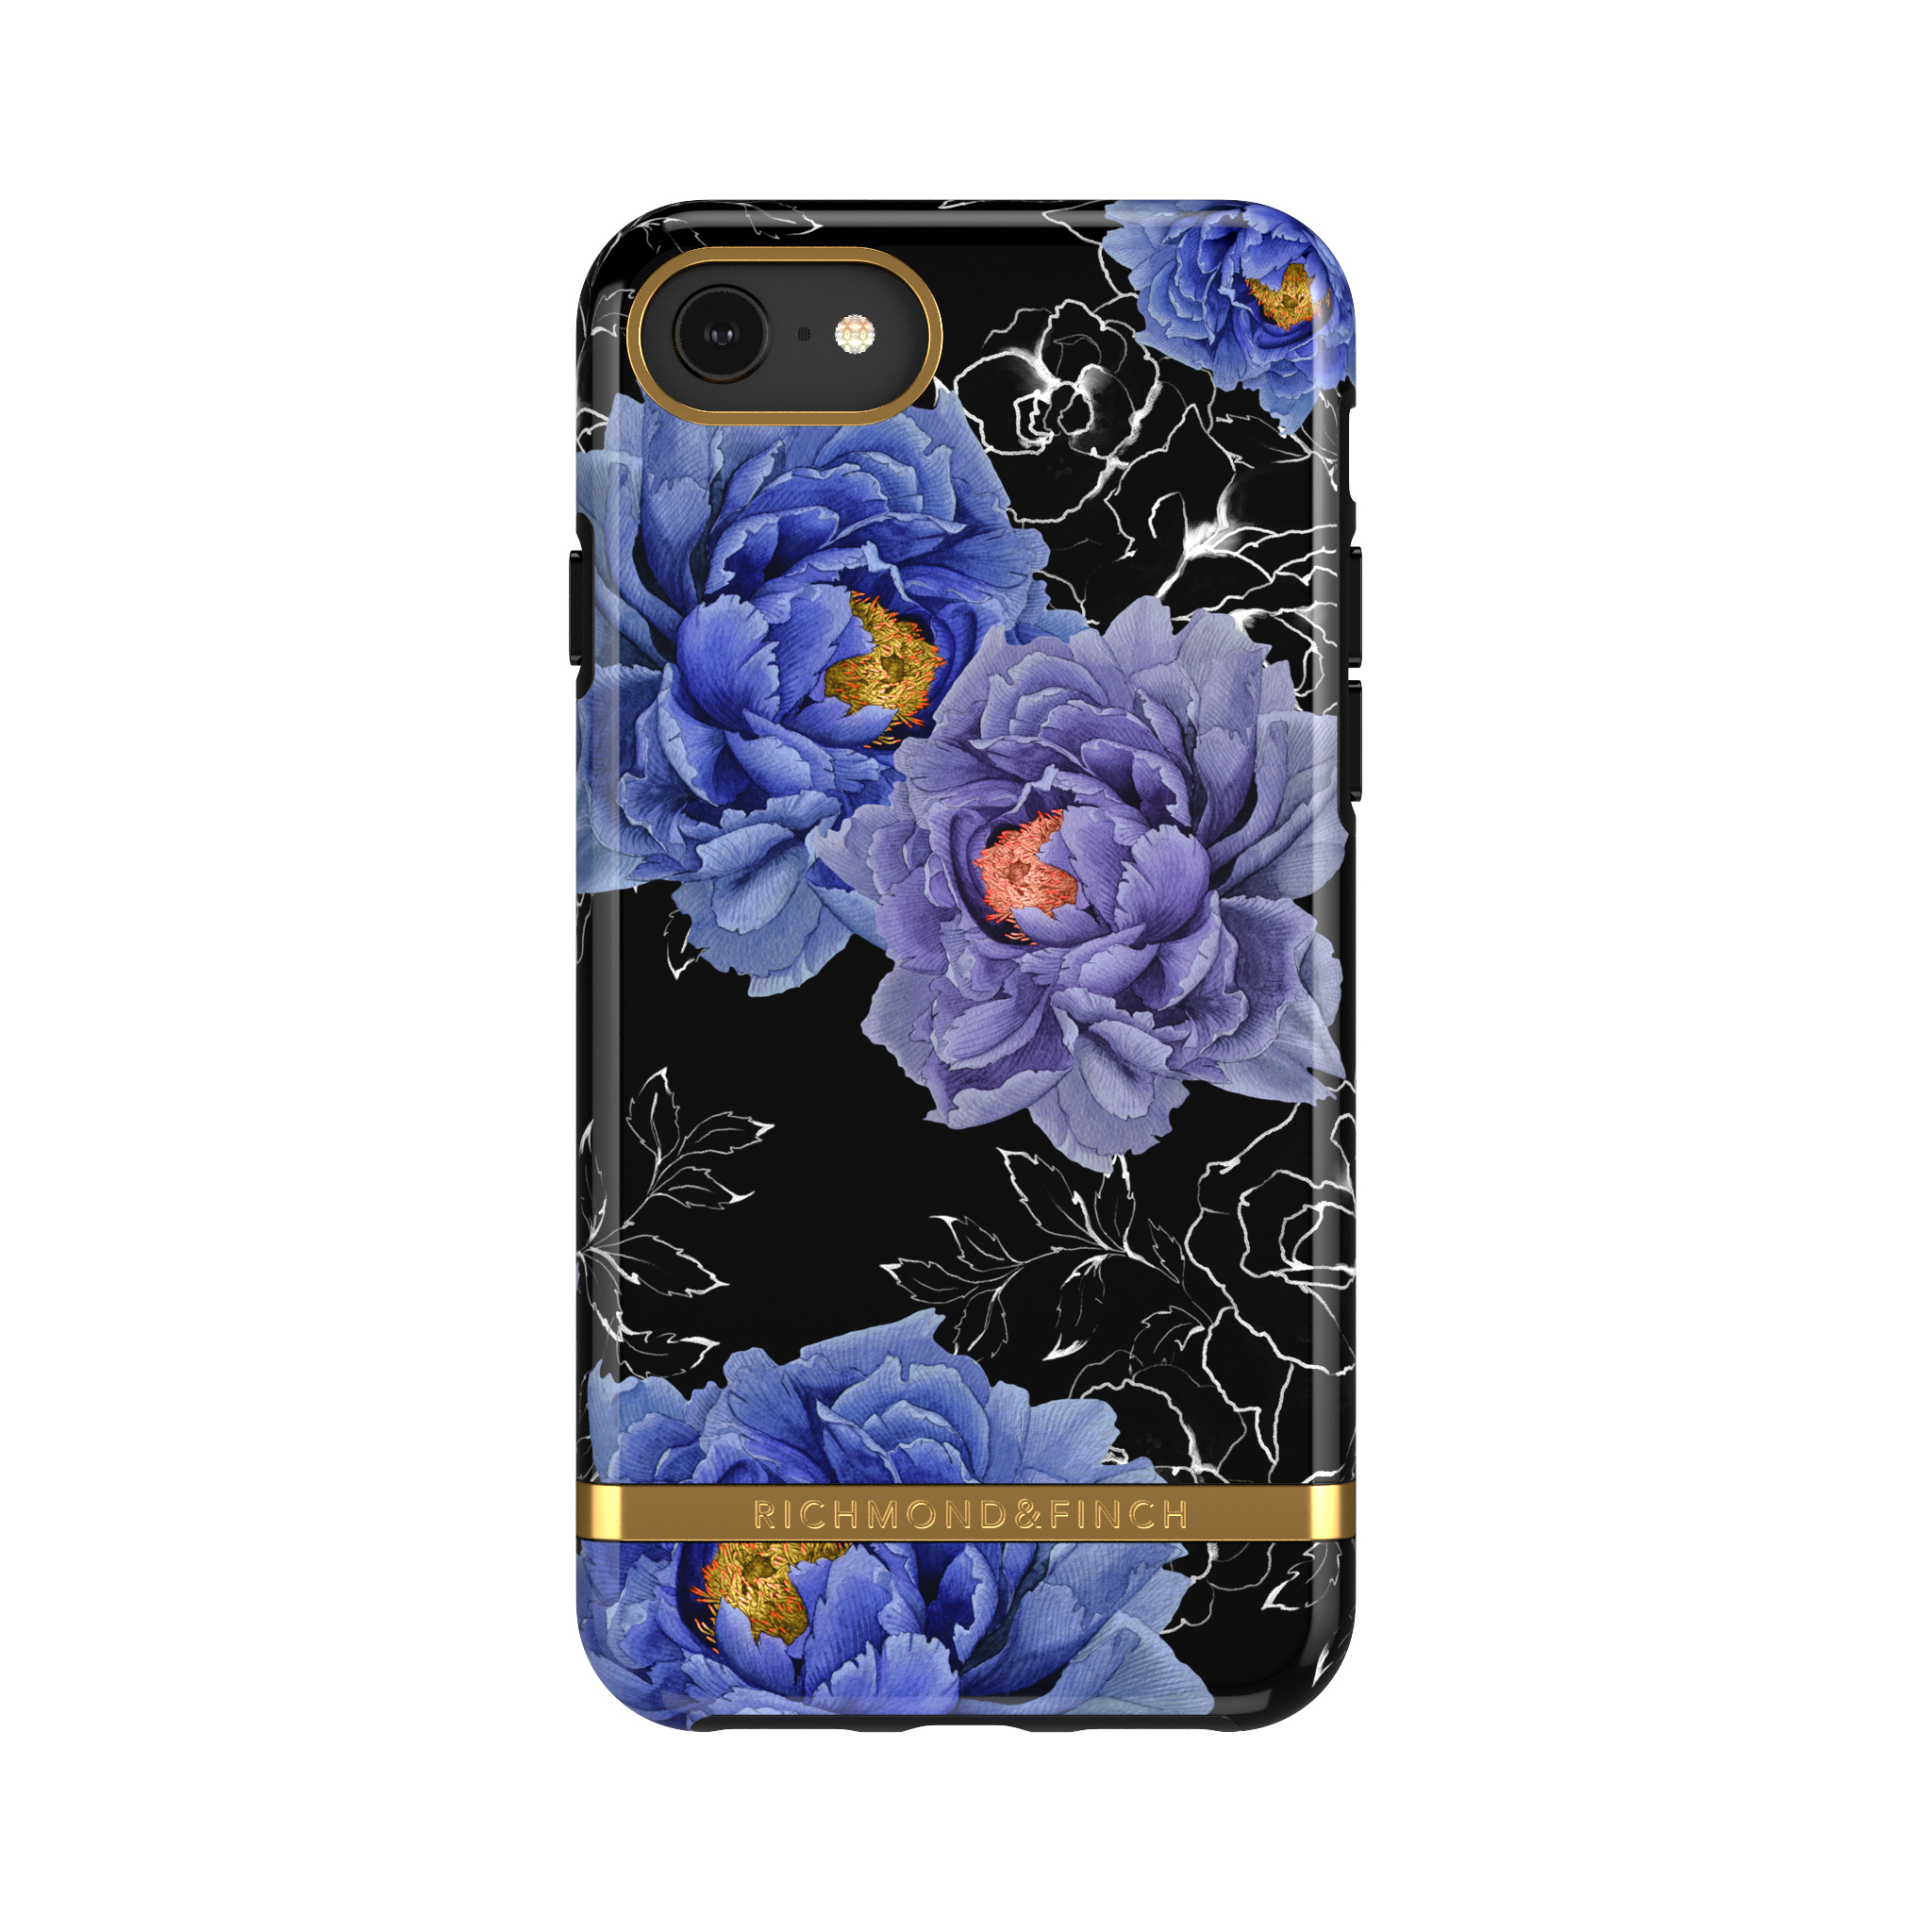 Details, Peonies APPLE, Backcover, FINCH COLOURFUL IPHONE 6/6S/7/8/SE20/SE22, Blooming - Gold RICHMOND &